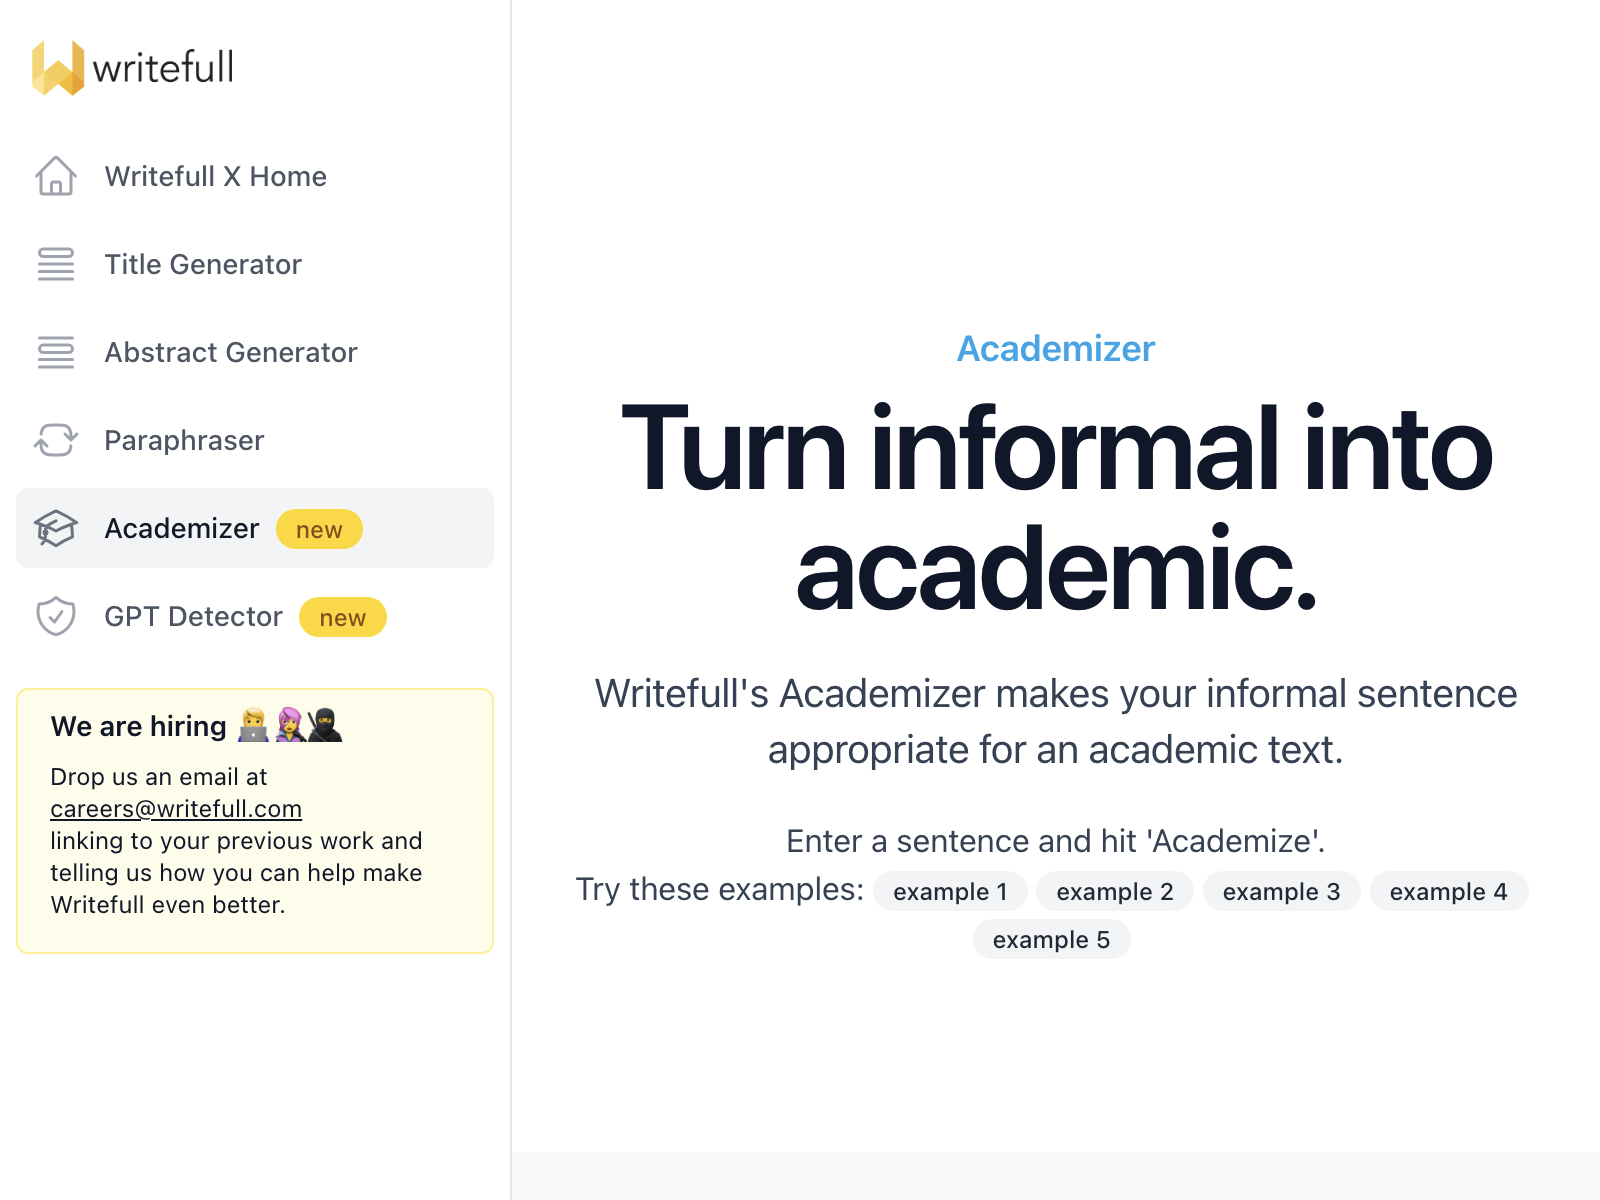 Writefull Academizer preview